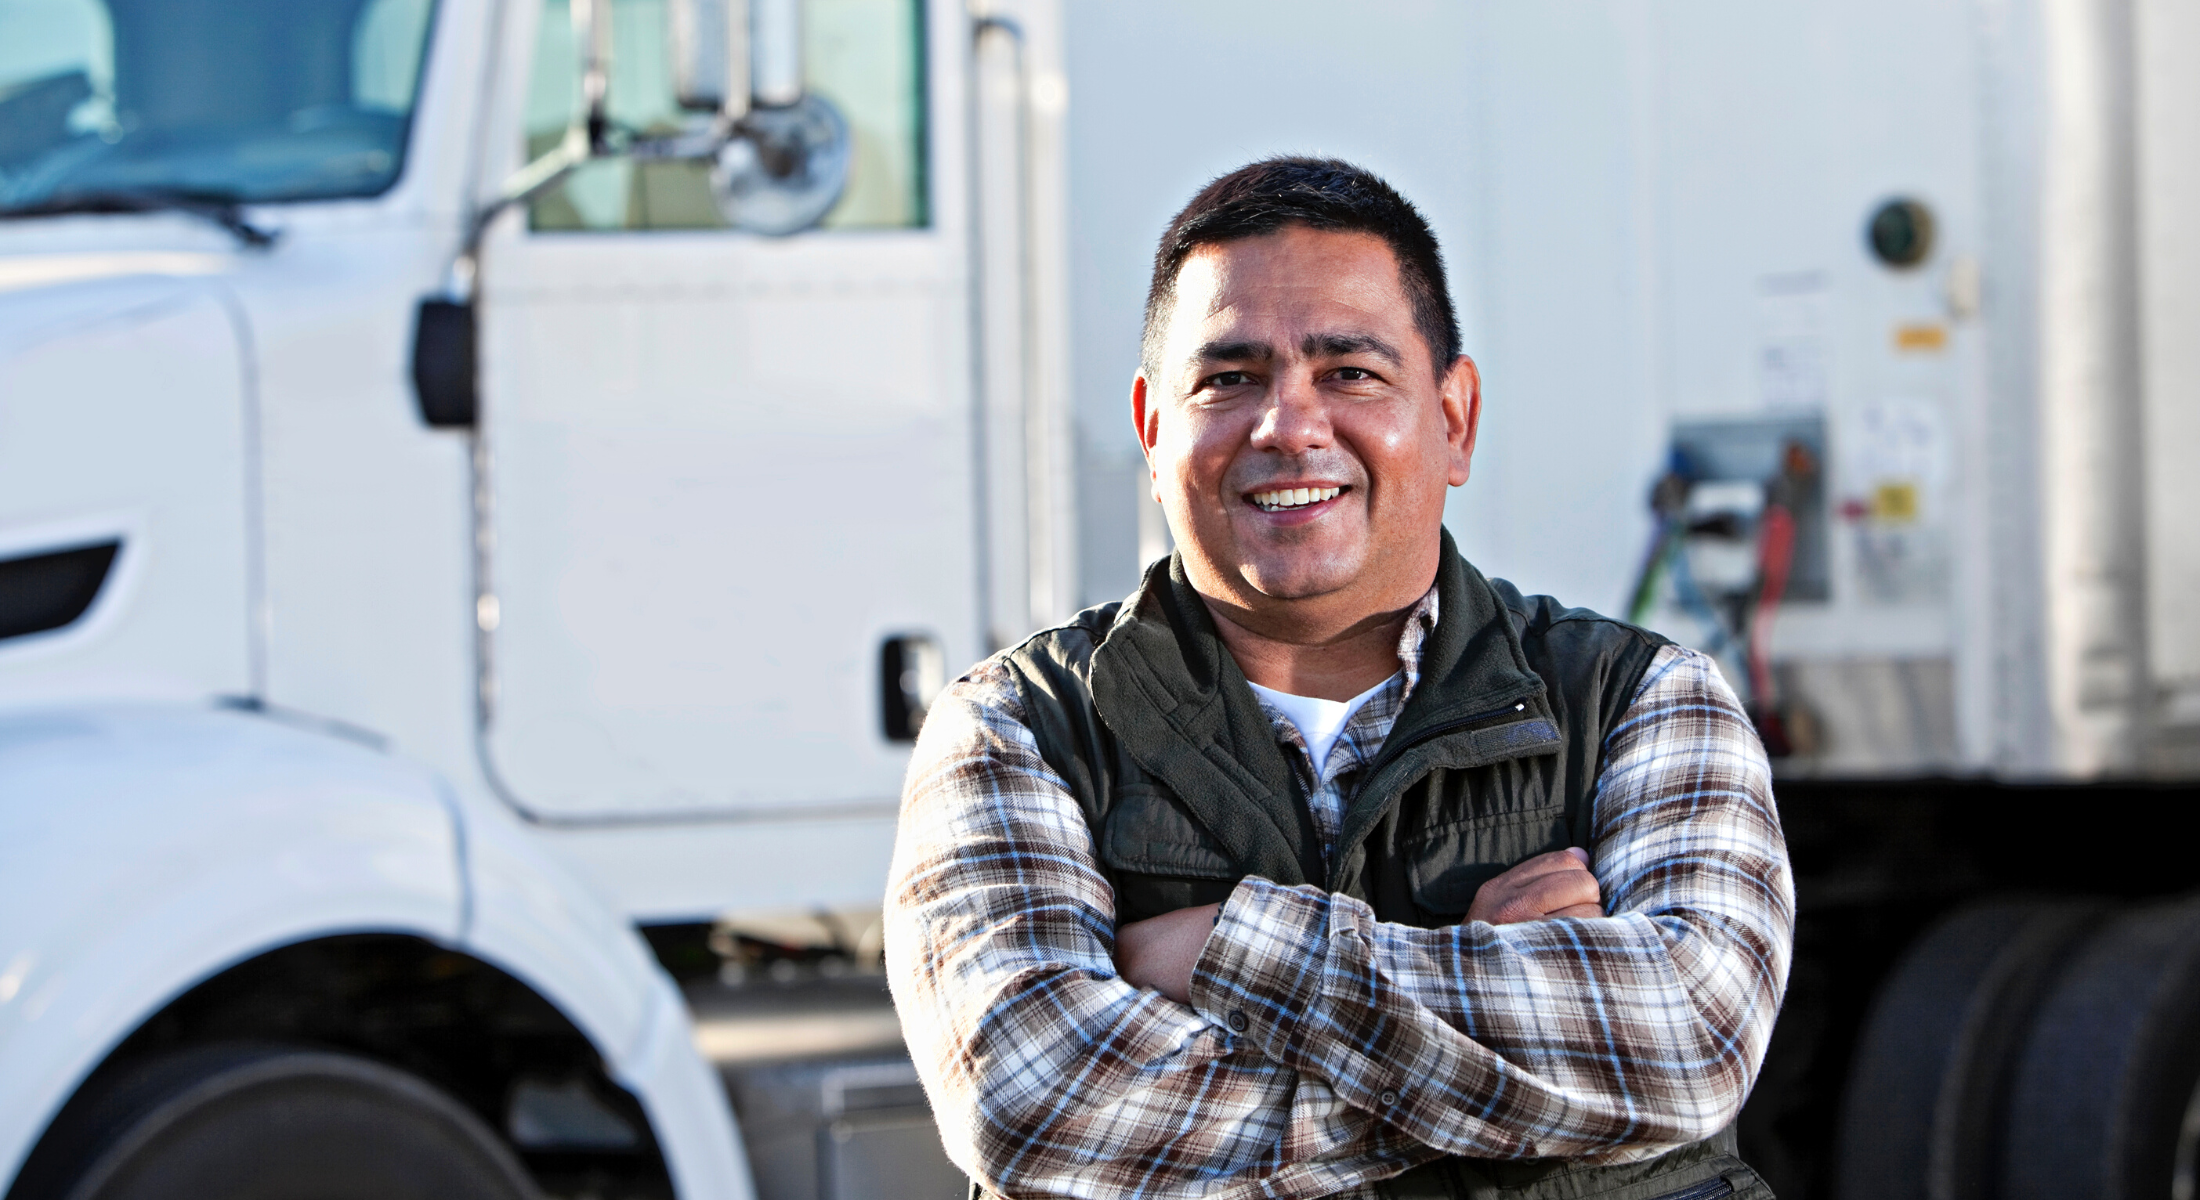 Truck driver smiling with arms folded